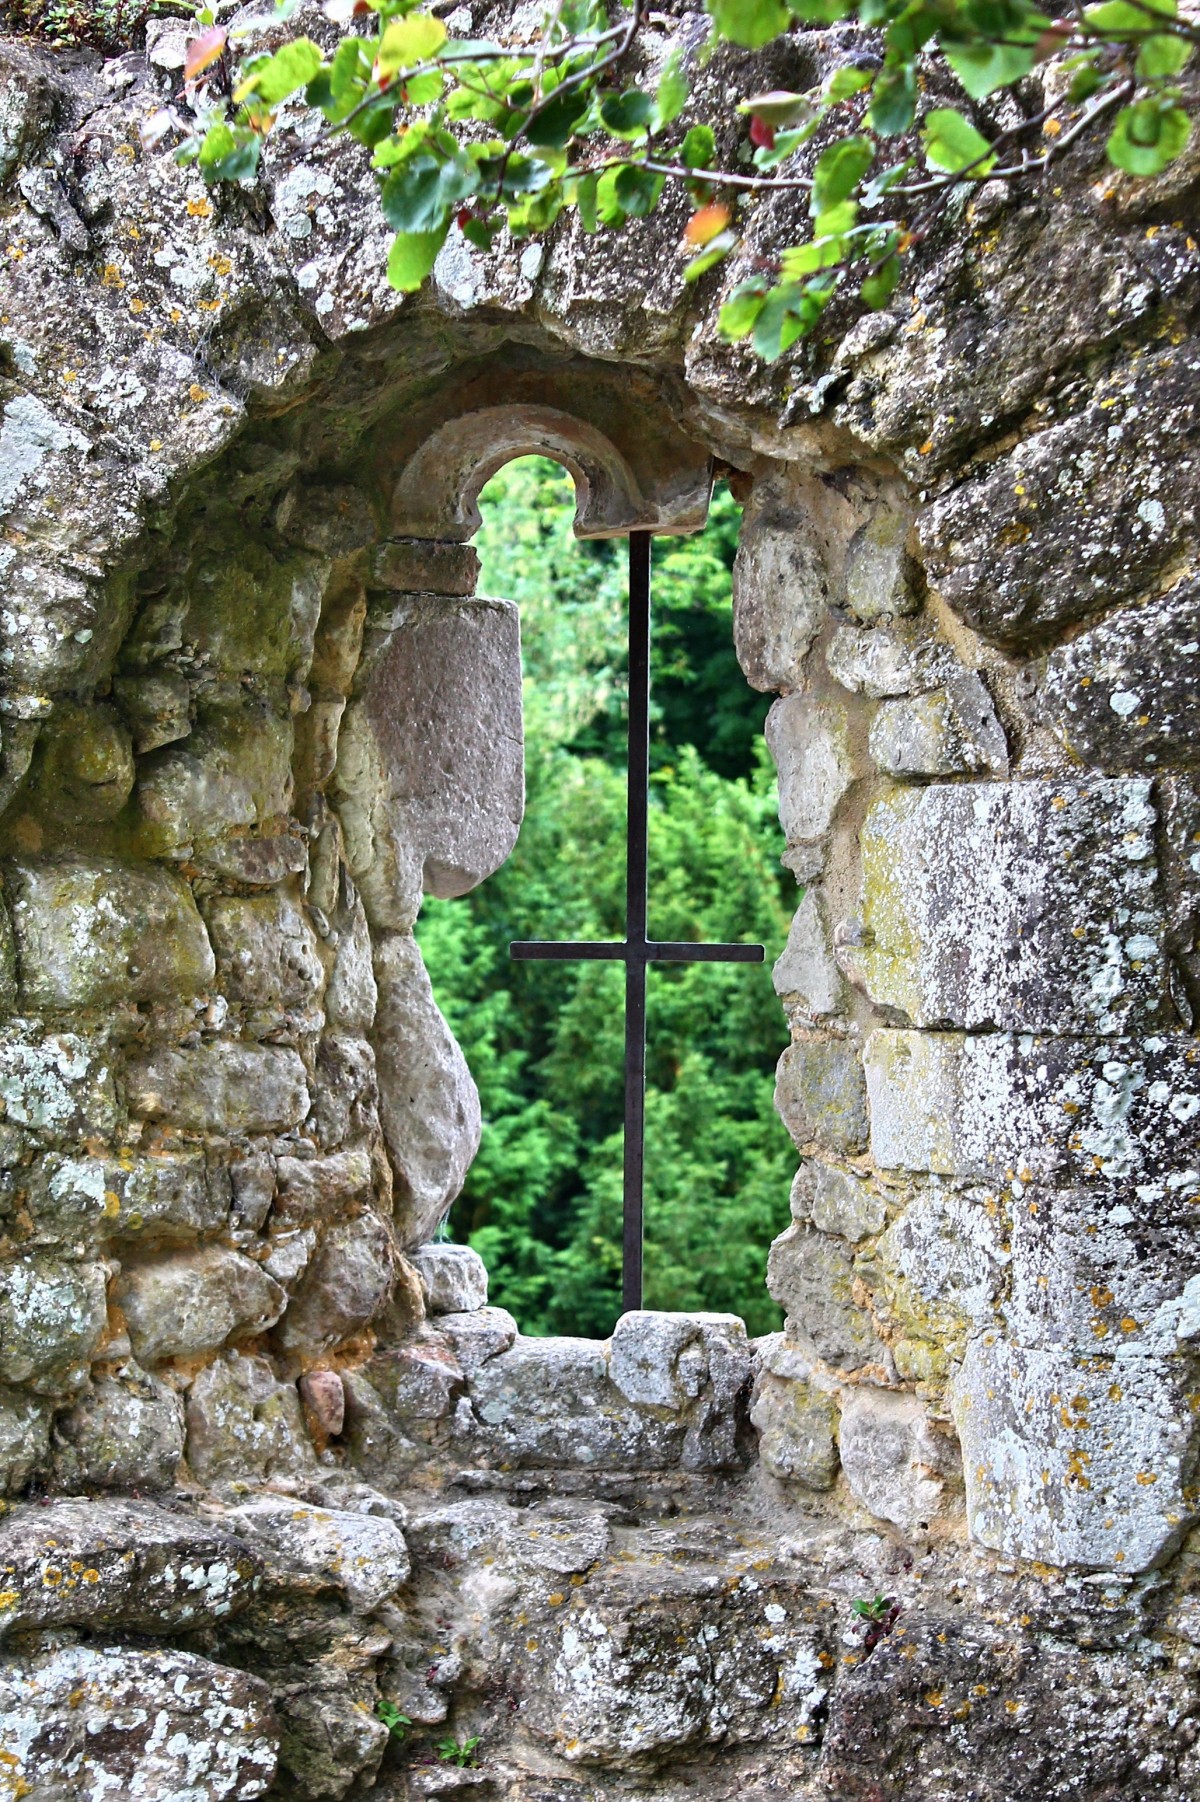 Stone garden wall with a whimsical hole that acts as a window